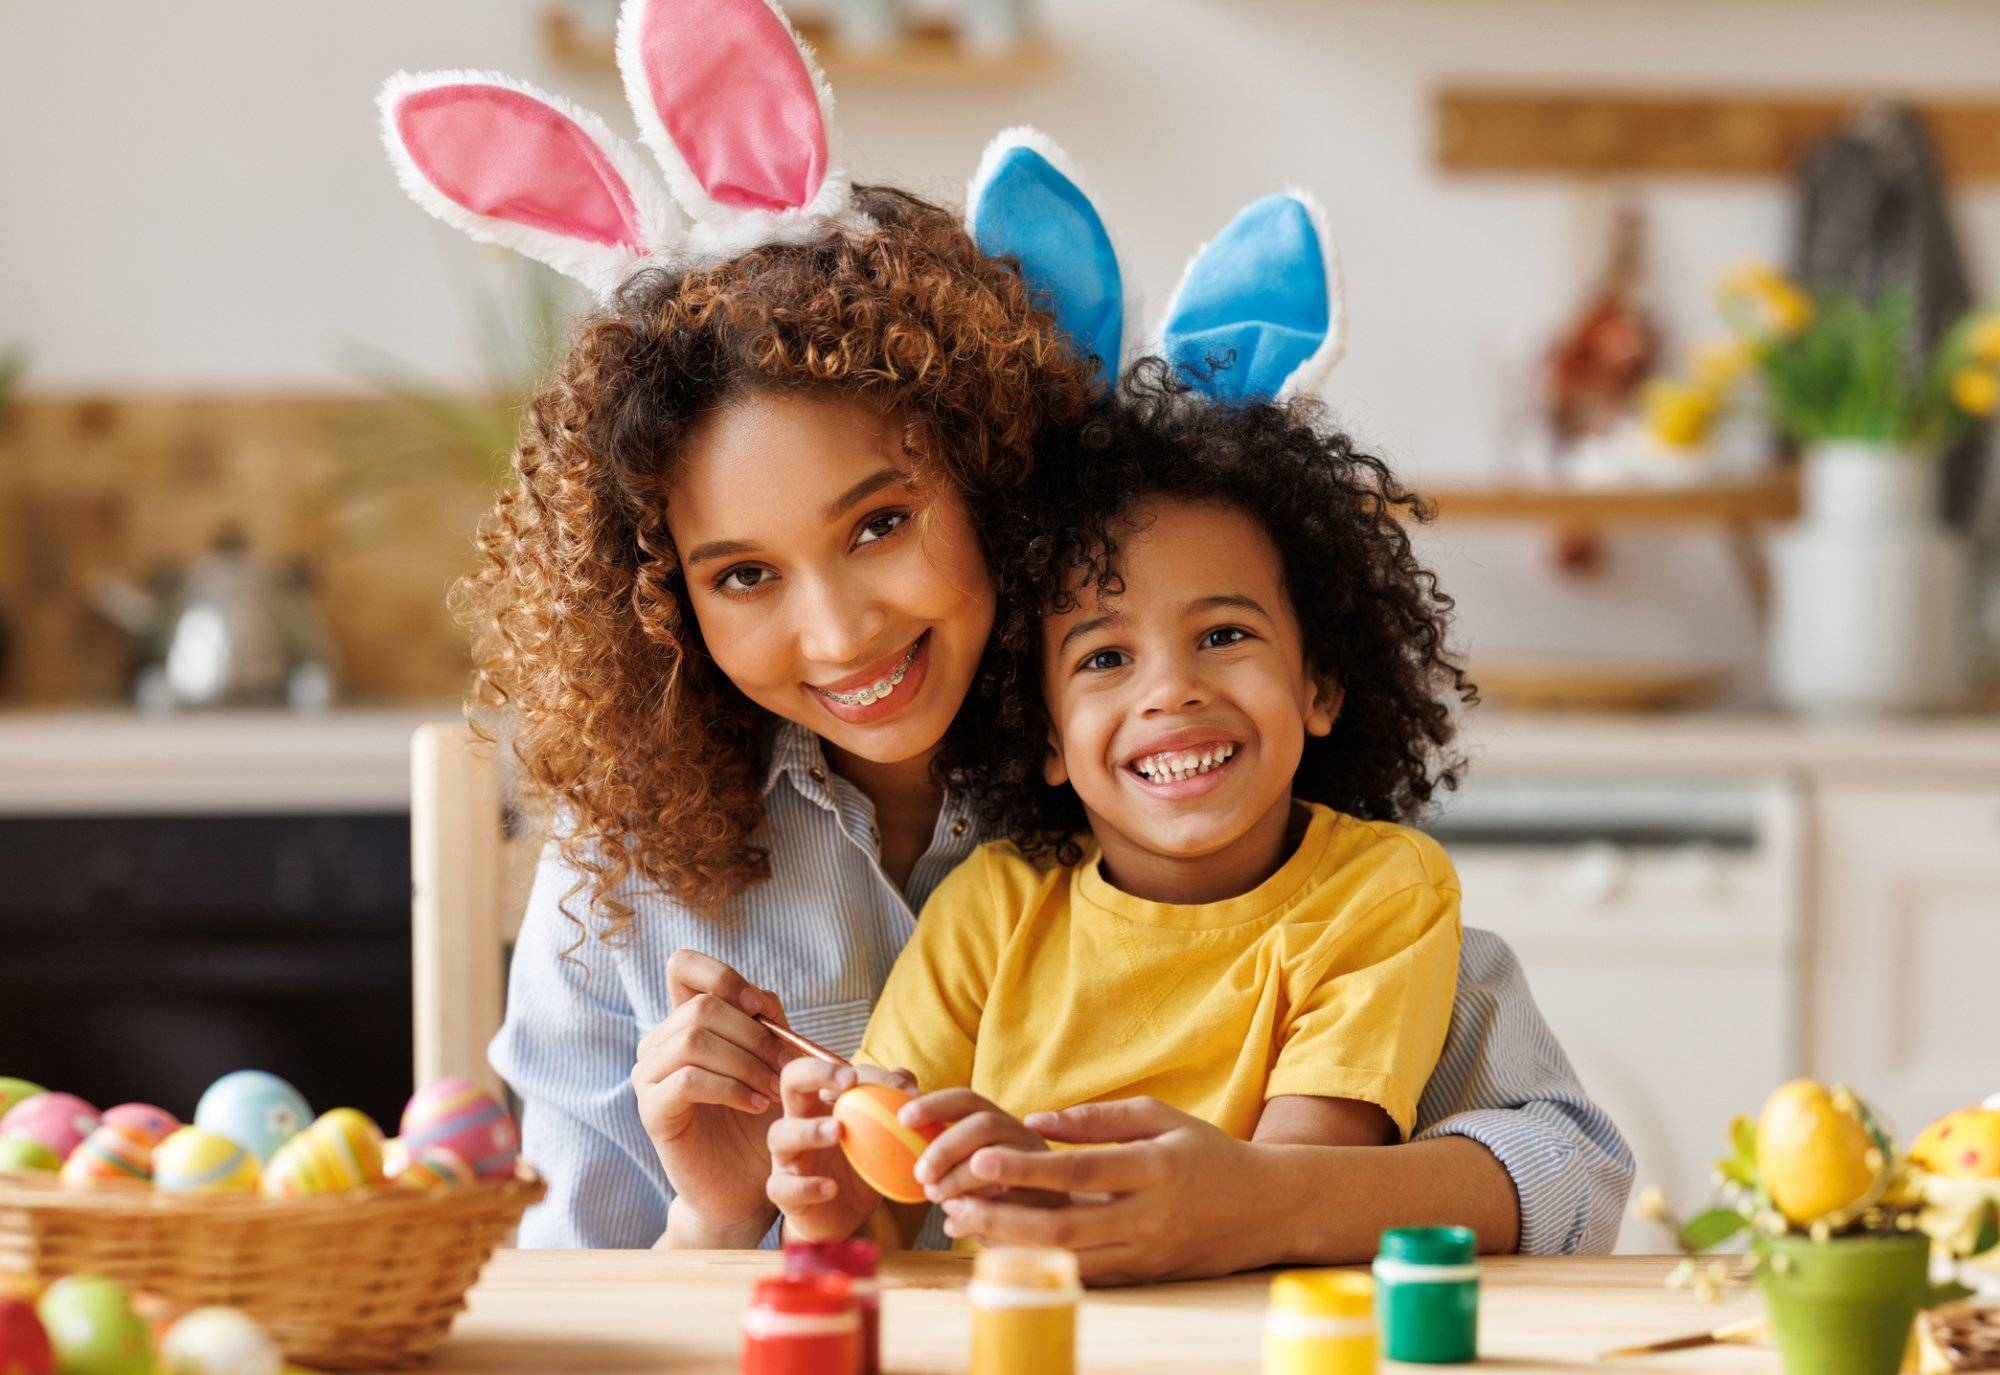 Discover the Best Easter Prep in Arlington at Ashbury Plaza
